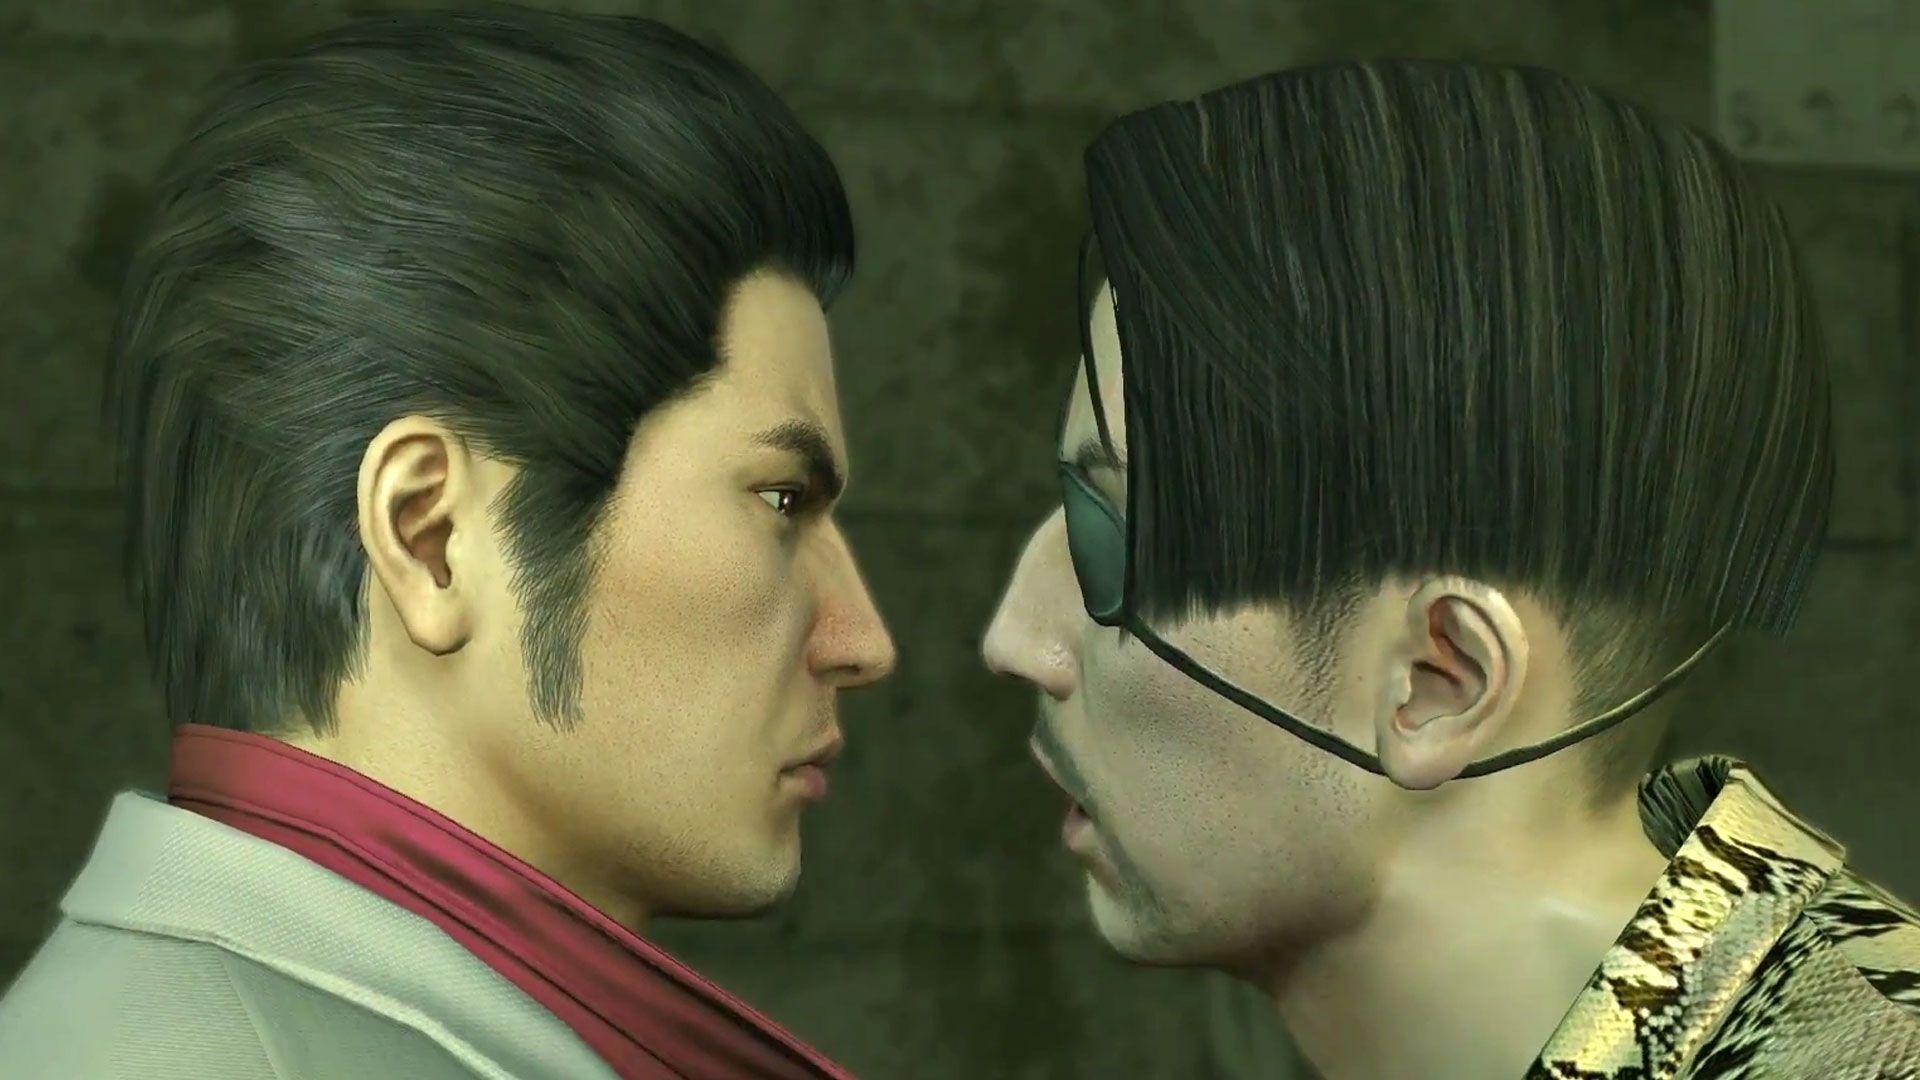 The Yakuza series tackles masculinity in a way few games can